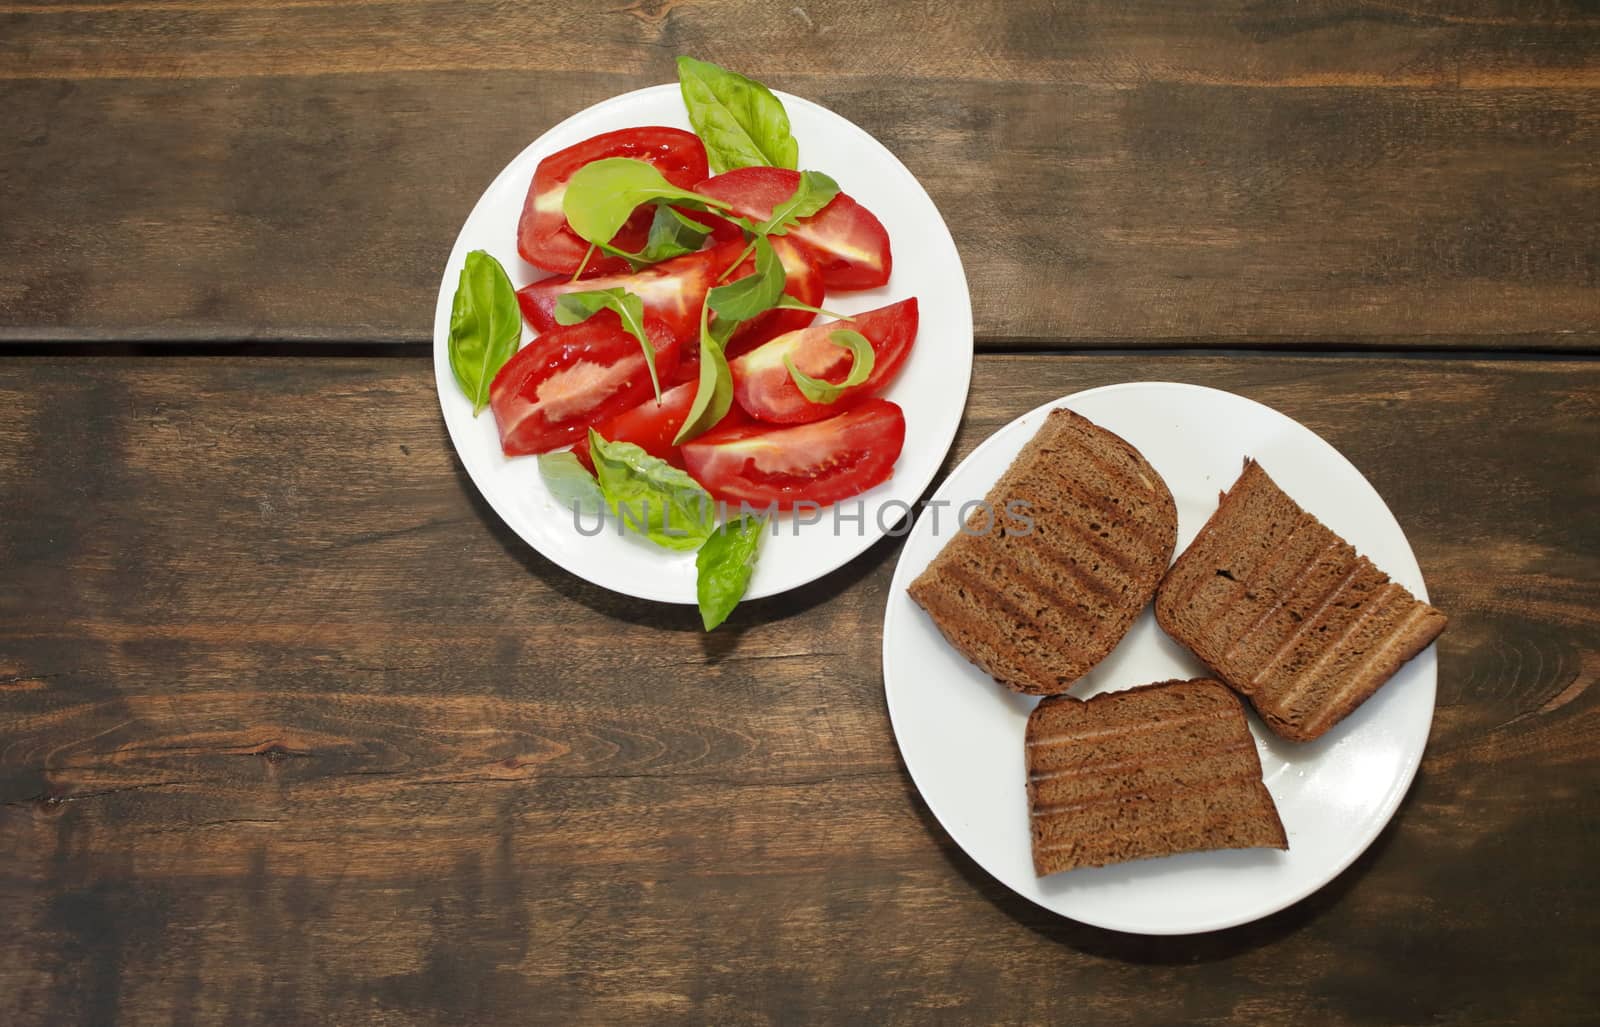 Sliced tomatoes with lettuce on a white plate. Fresh bread toast. Healthy eating concept by selinsmo